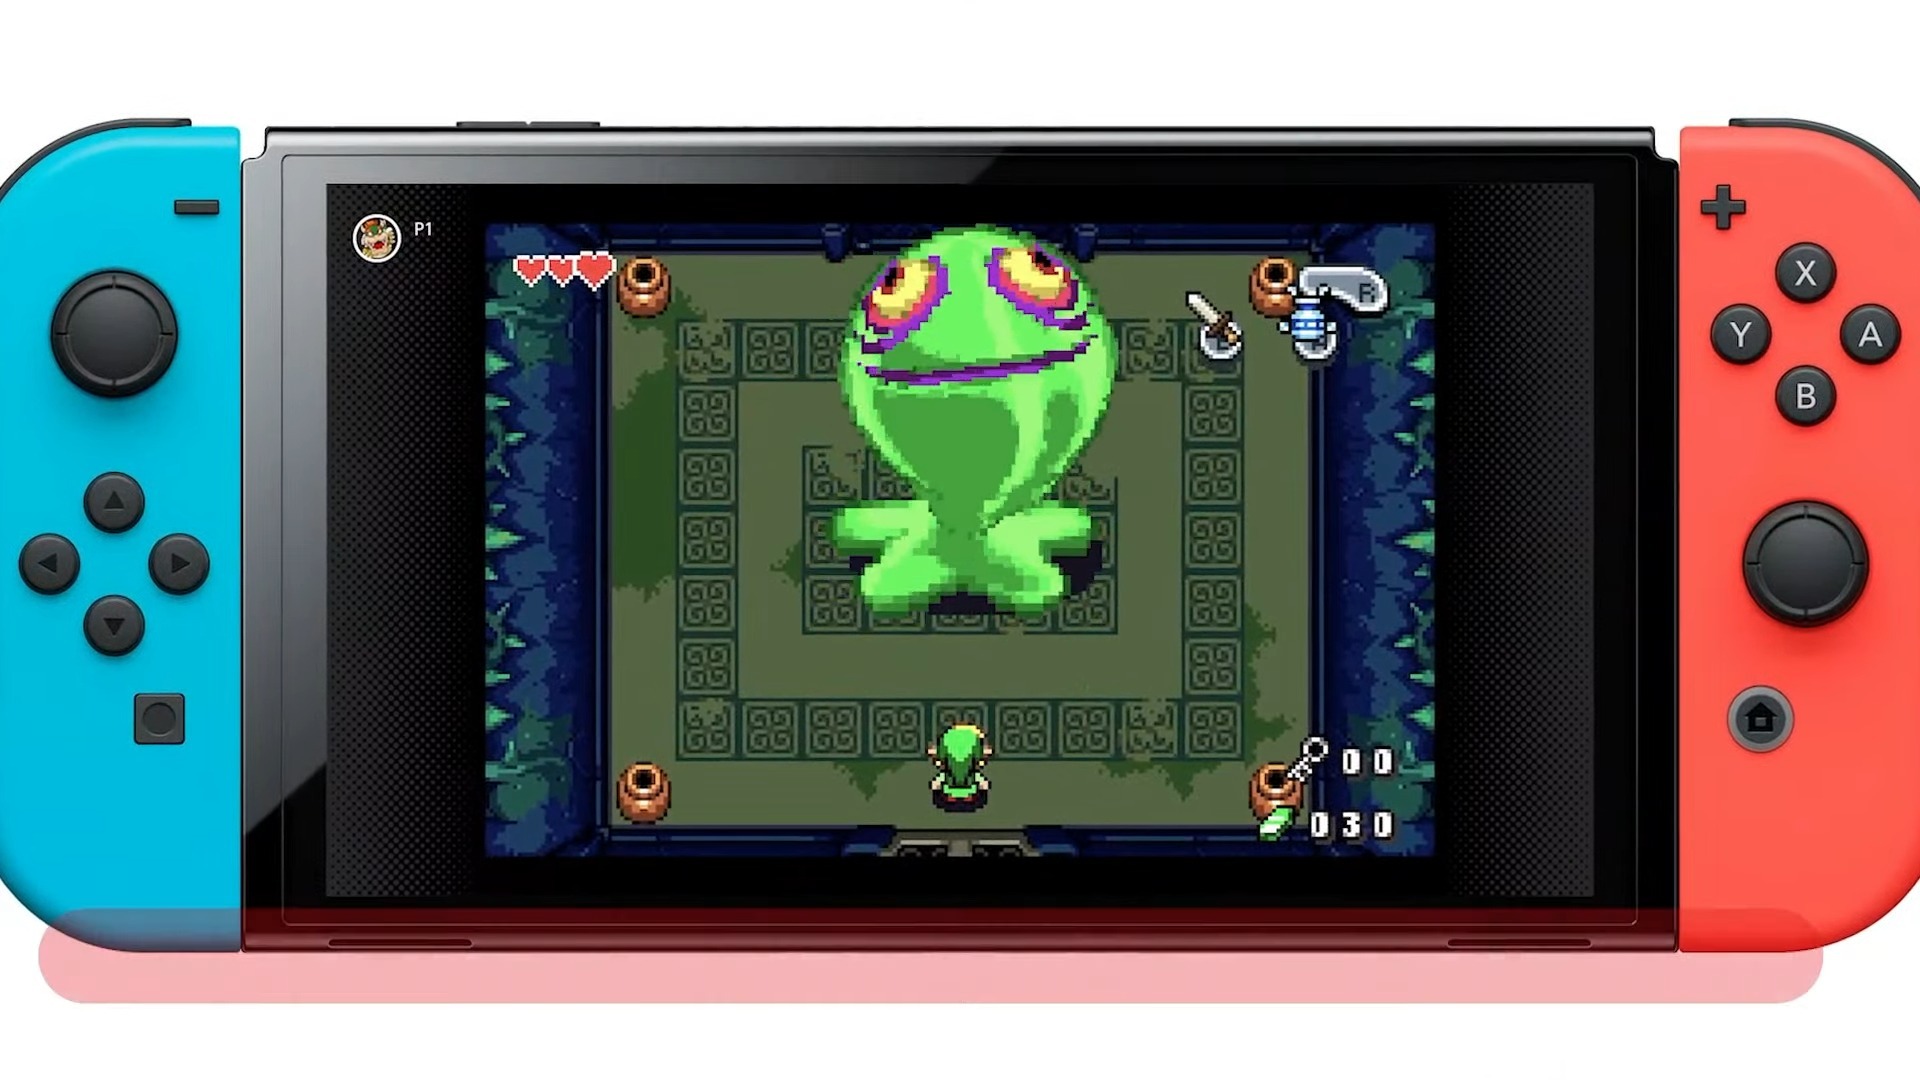 Legend of Zelda: A Link to the Past - Game Boy Advance GBA Game